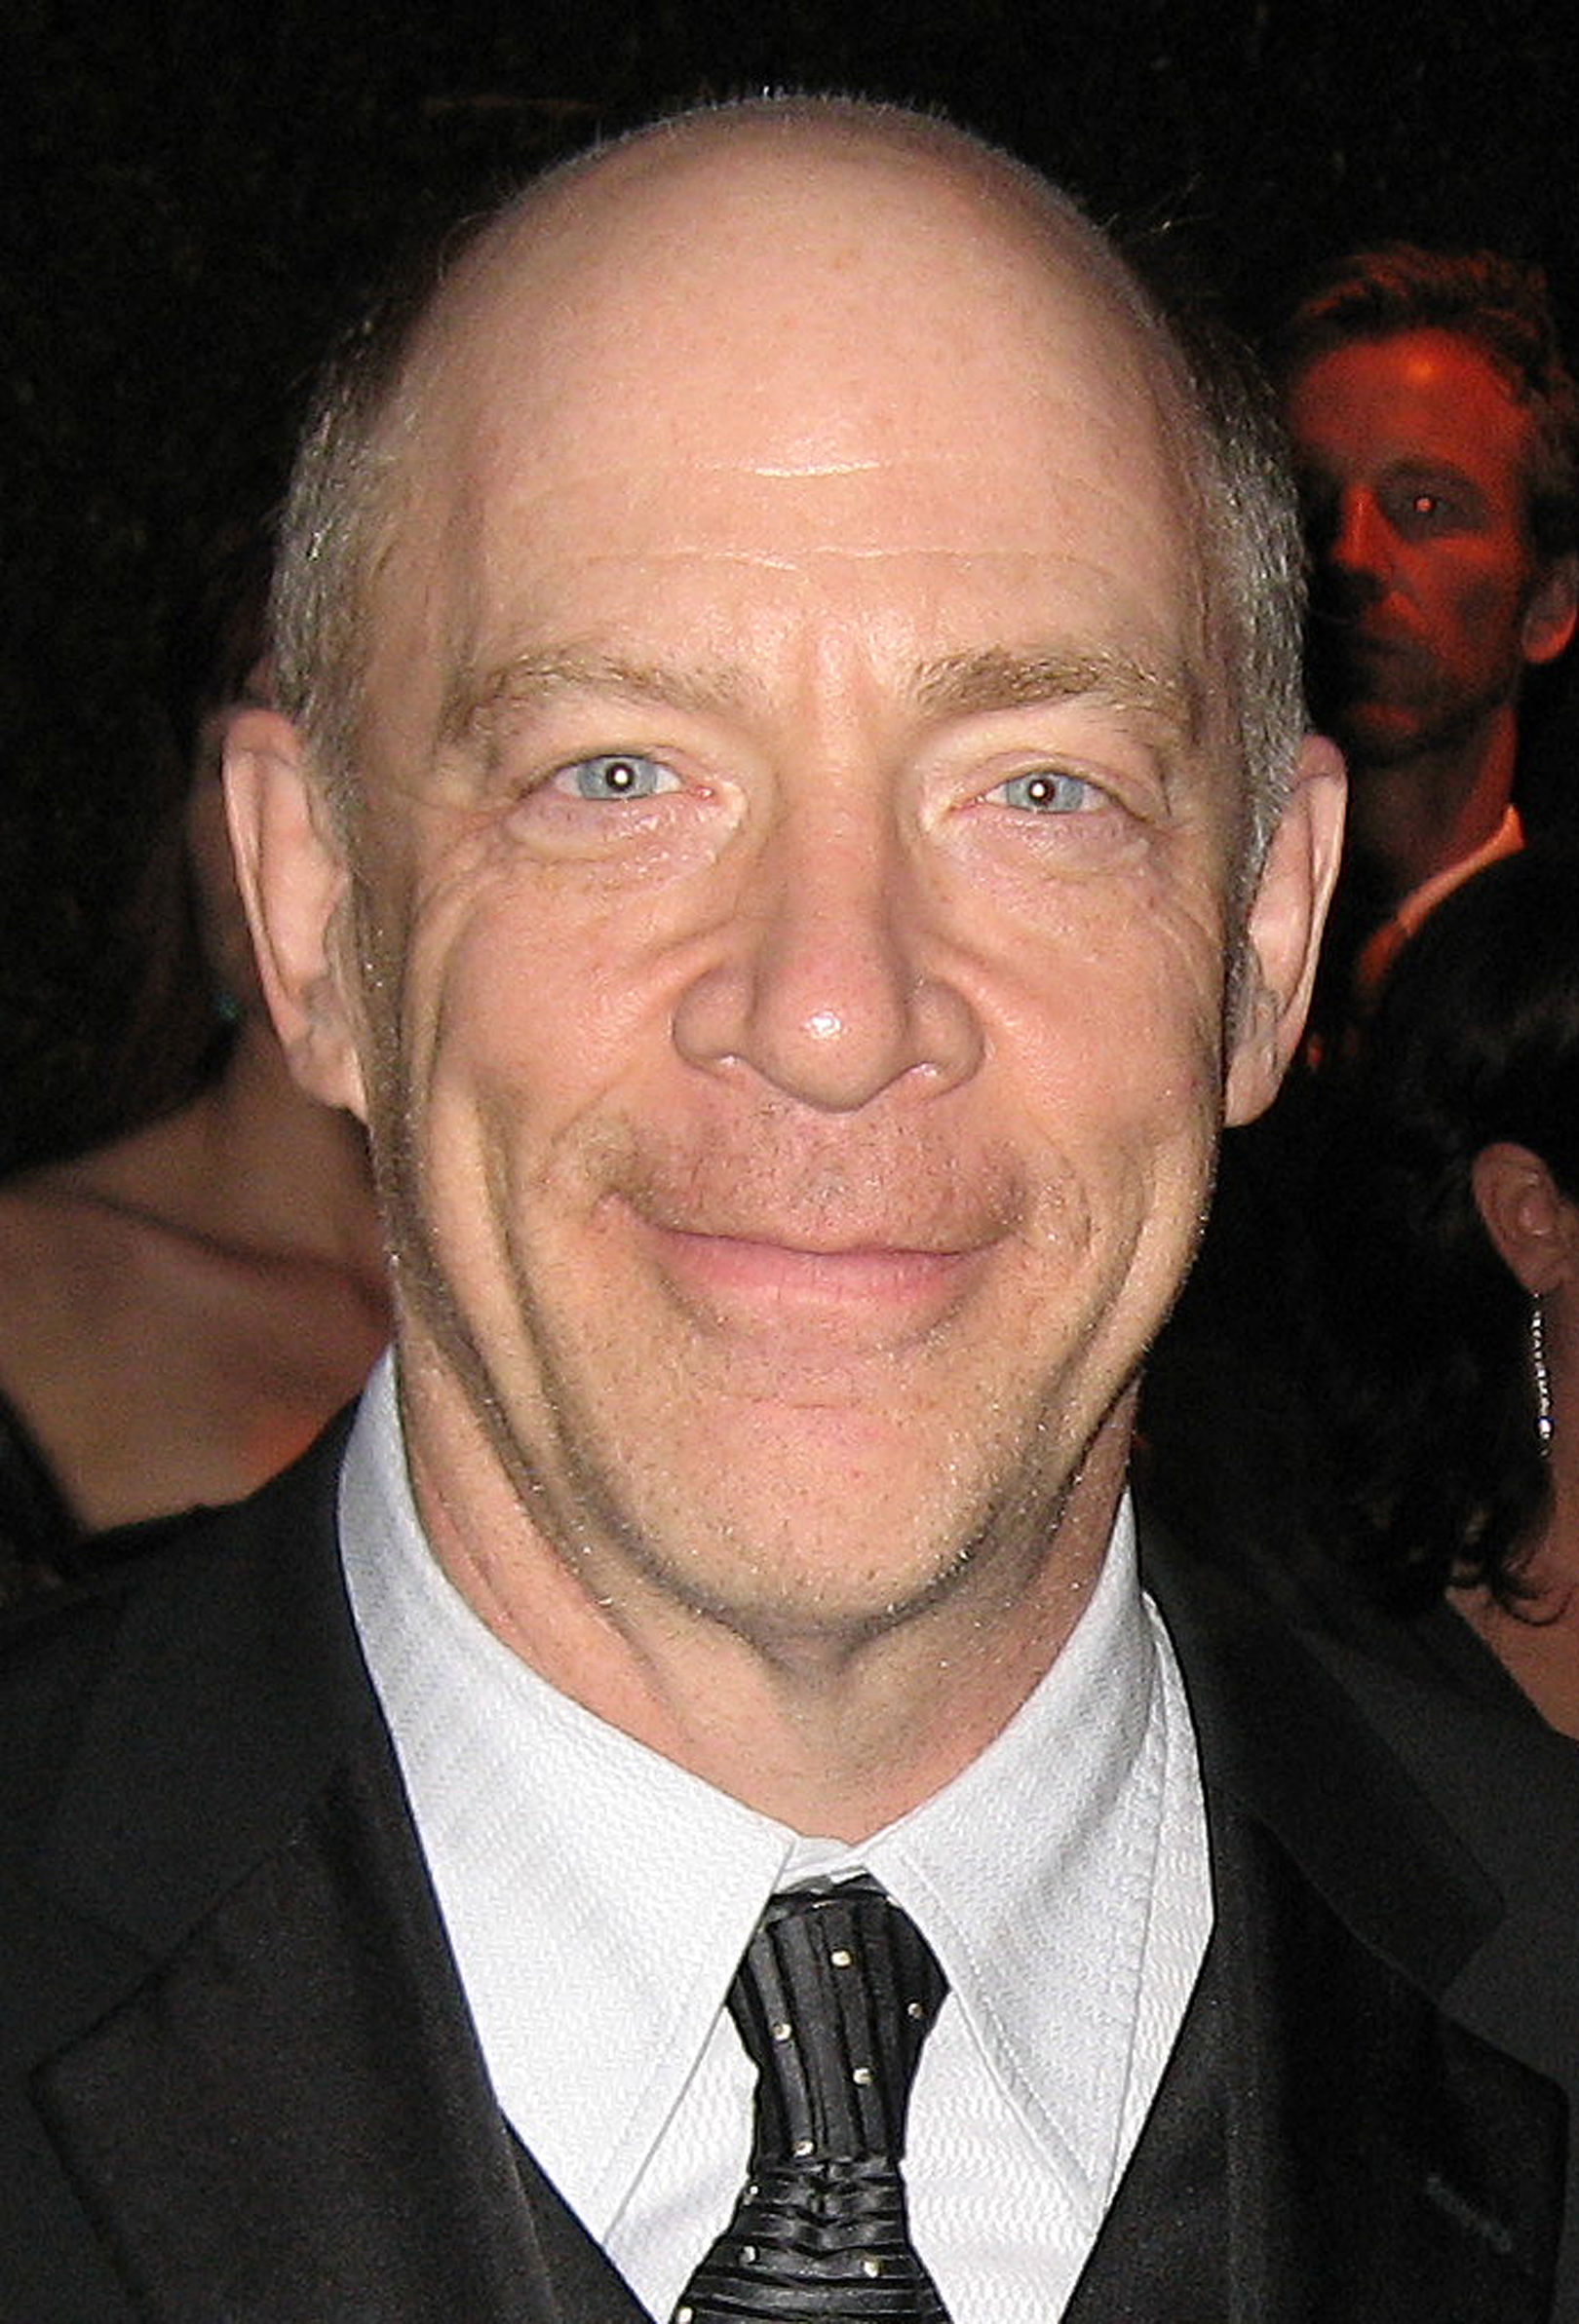 Phot of JK Simmons By Own work - Own work, CC BY-SA 3.0, https://commons.wikimedia.org/w/index.php?curid=38590091